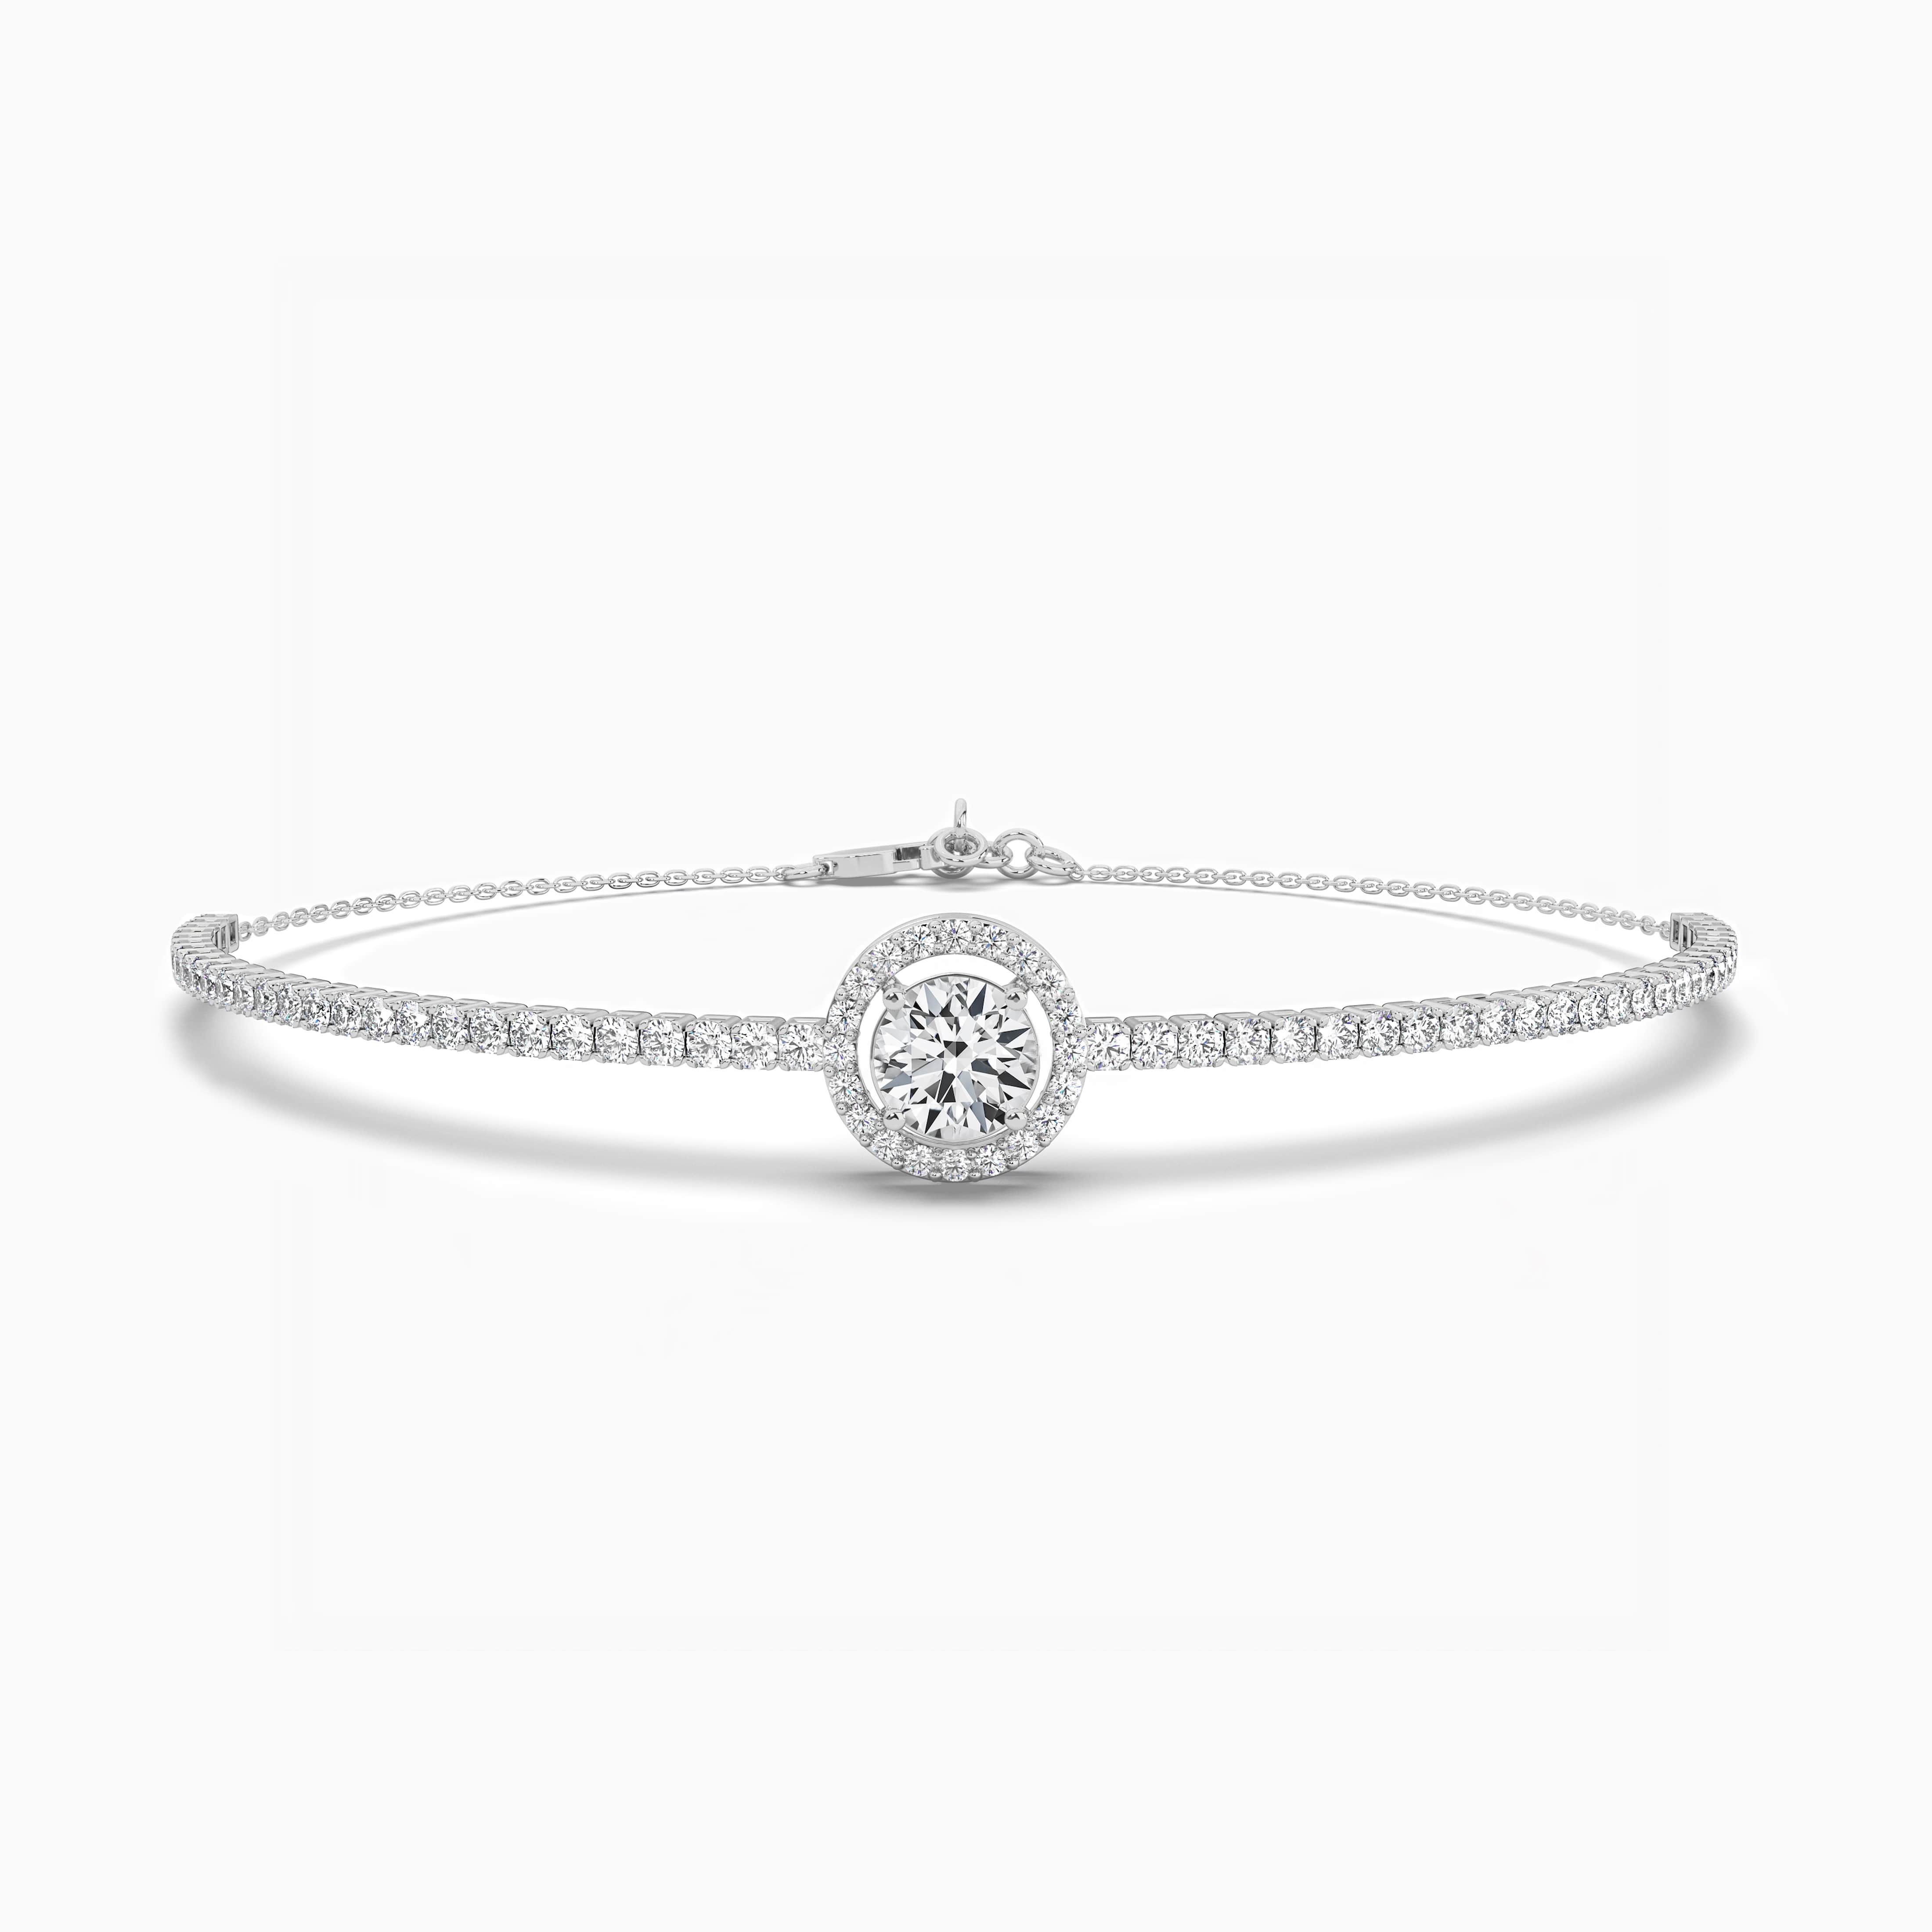 STERLING SILVER RHODIUM-PLATED CUBIC ZIRCONIA OVAL LINK BRACELET